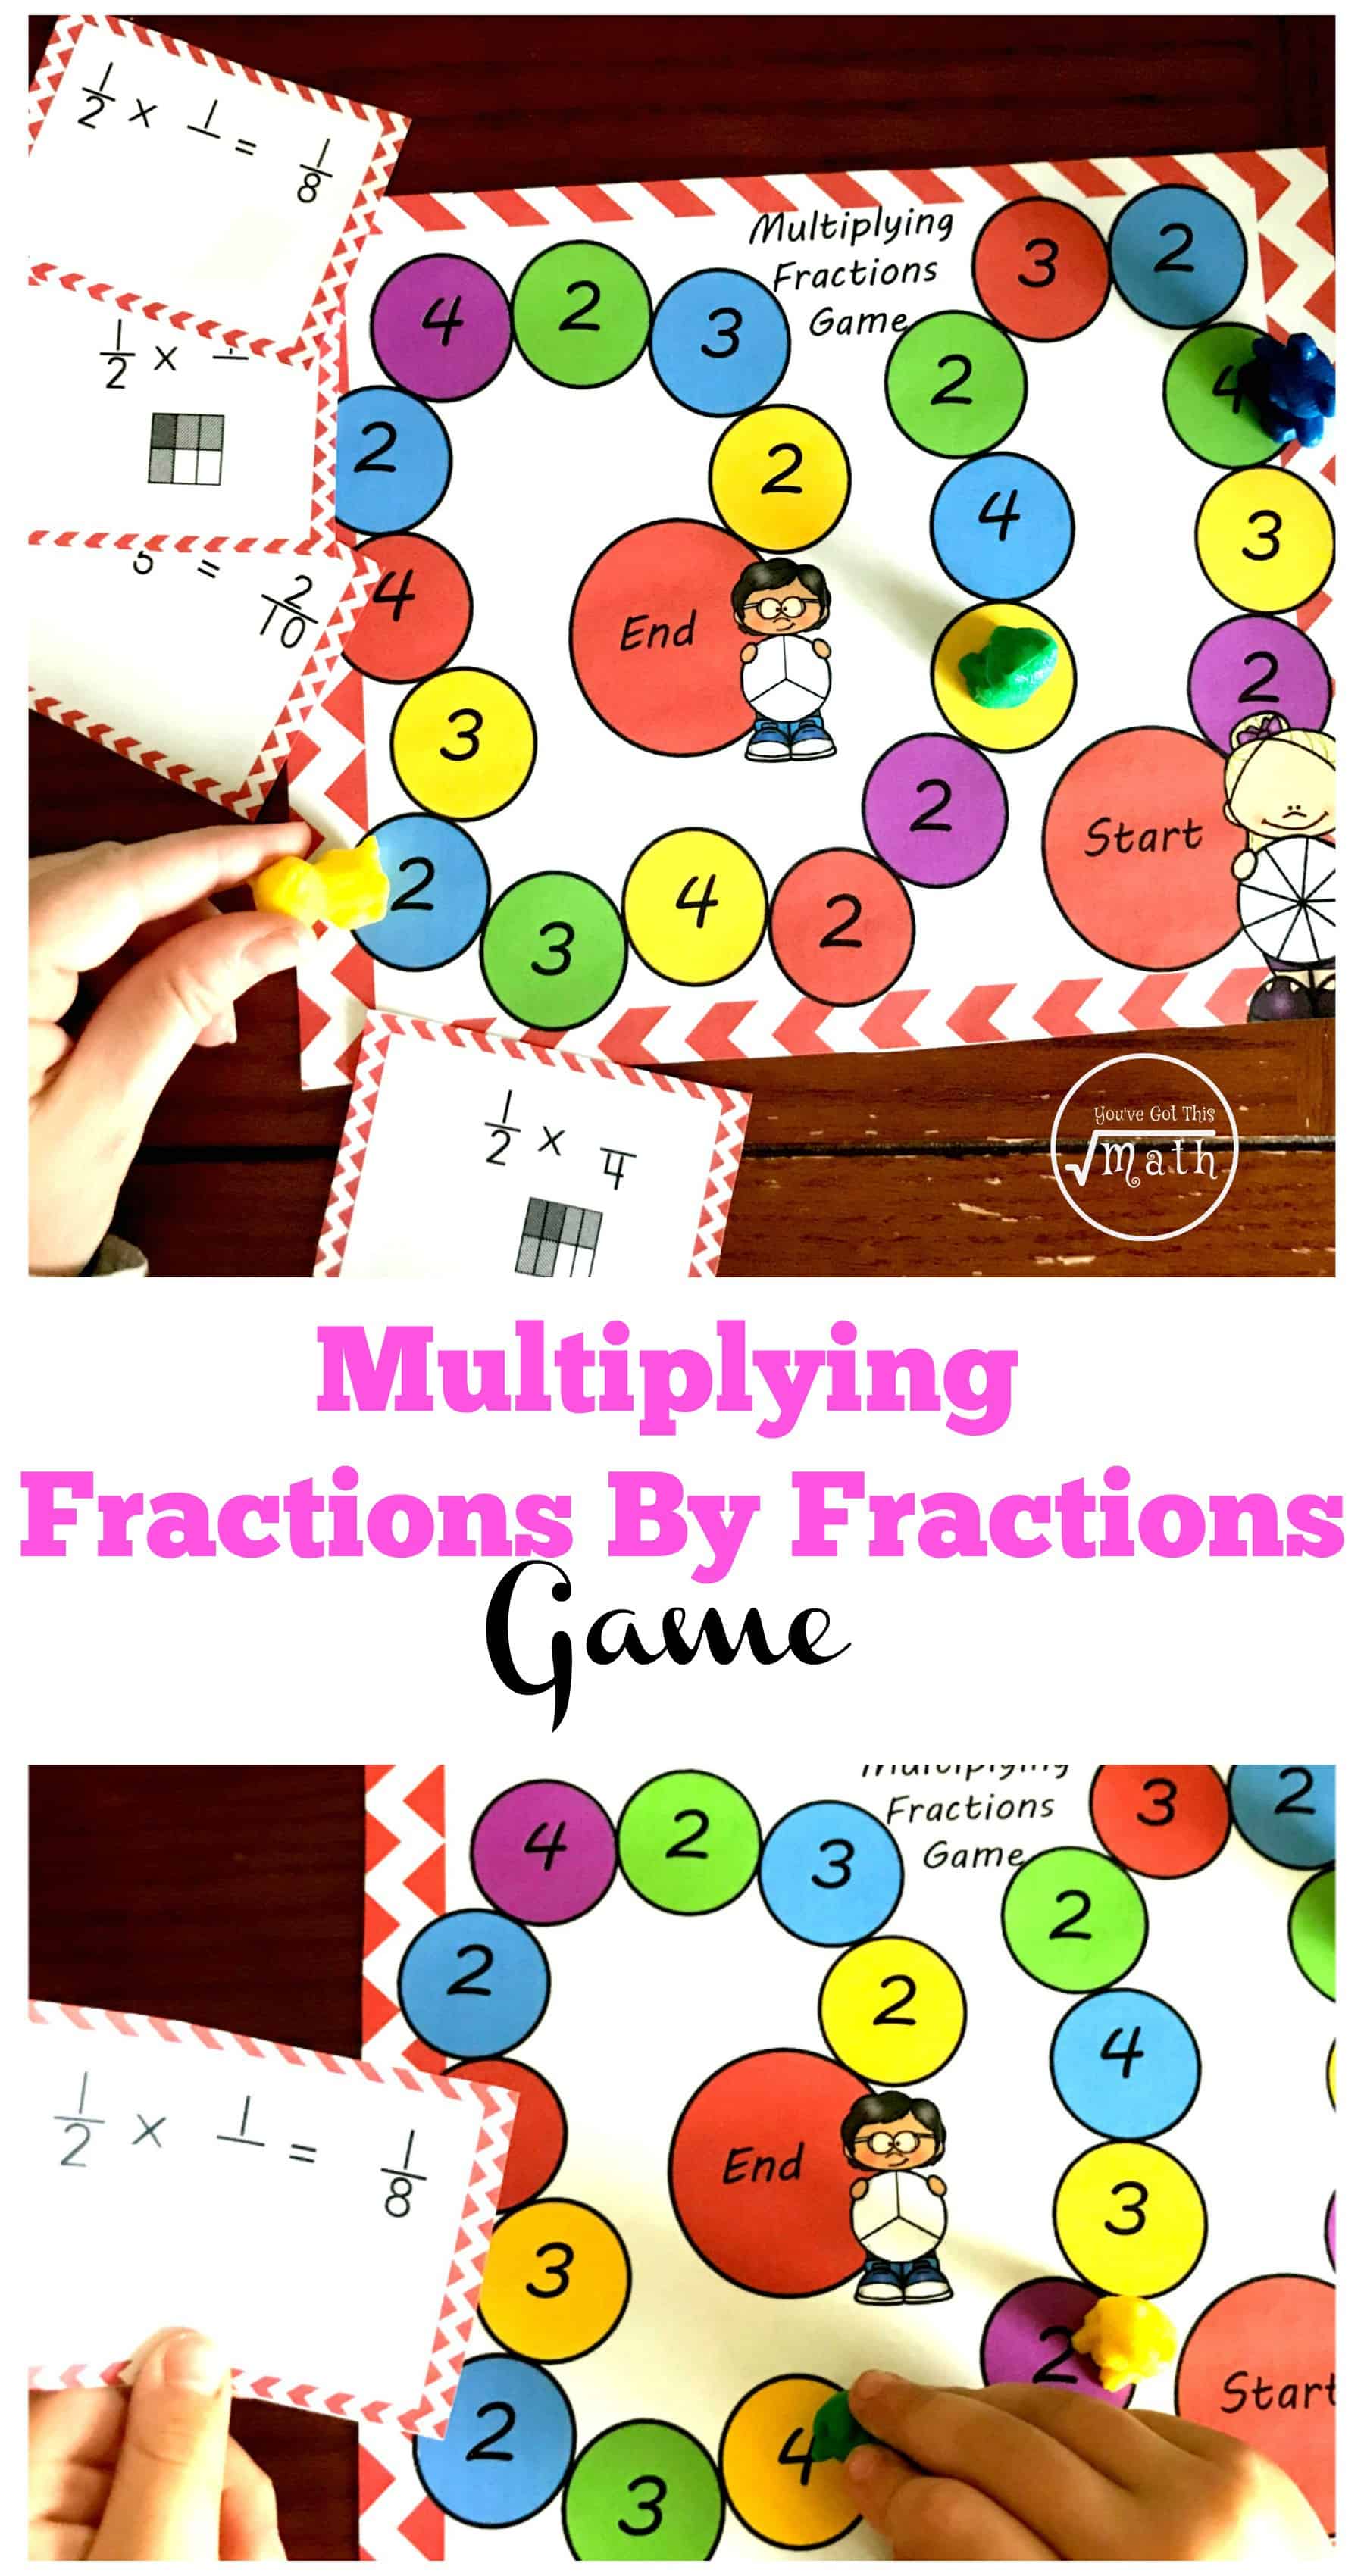 This FREE printable fraction game is a great way to practice solving fractions by fraction multiplication problems. There are simple expressions to solve, and there are some problems that require students to solve using an area model.